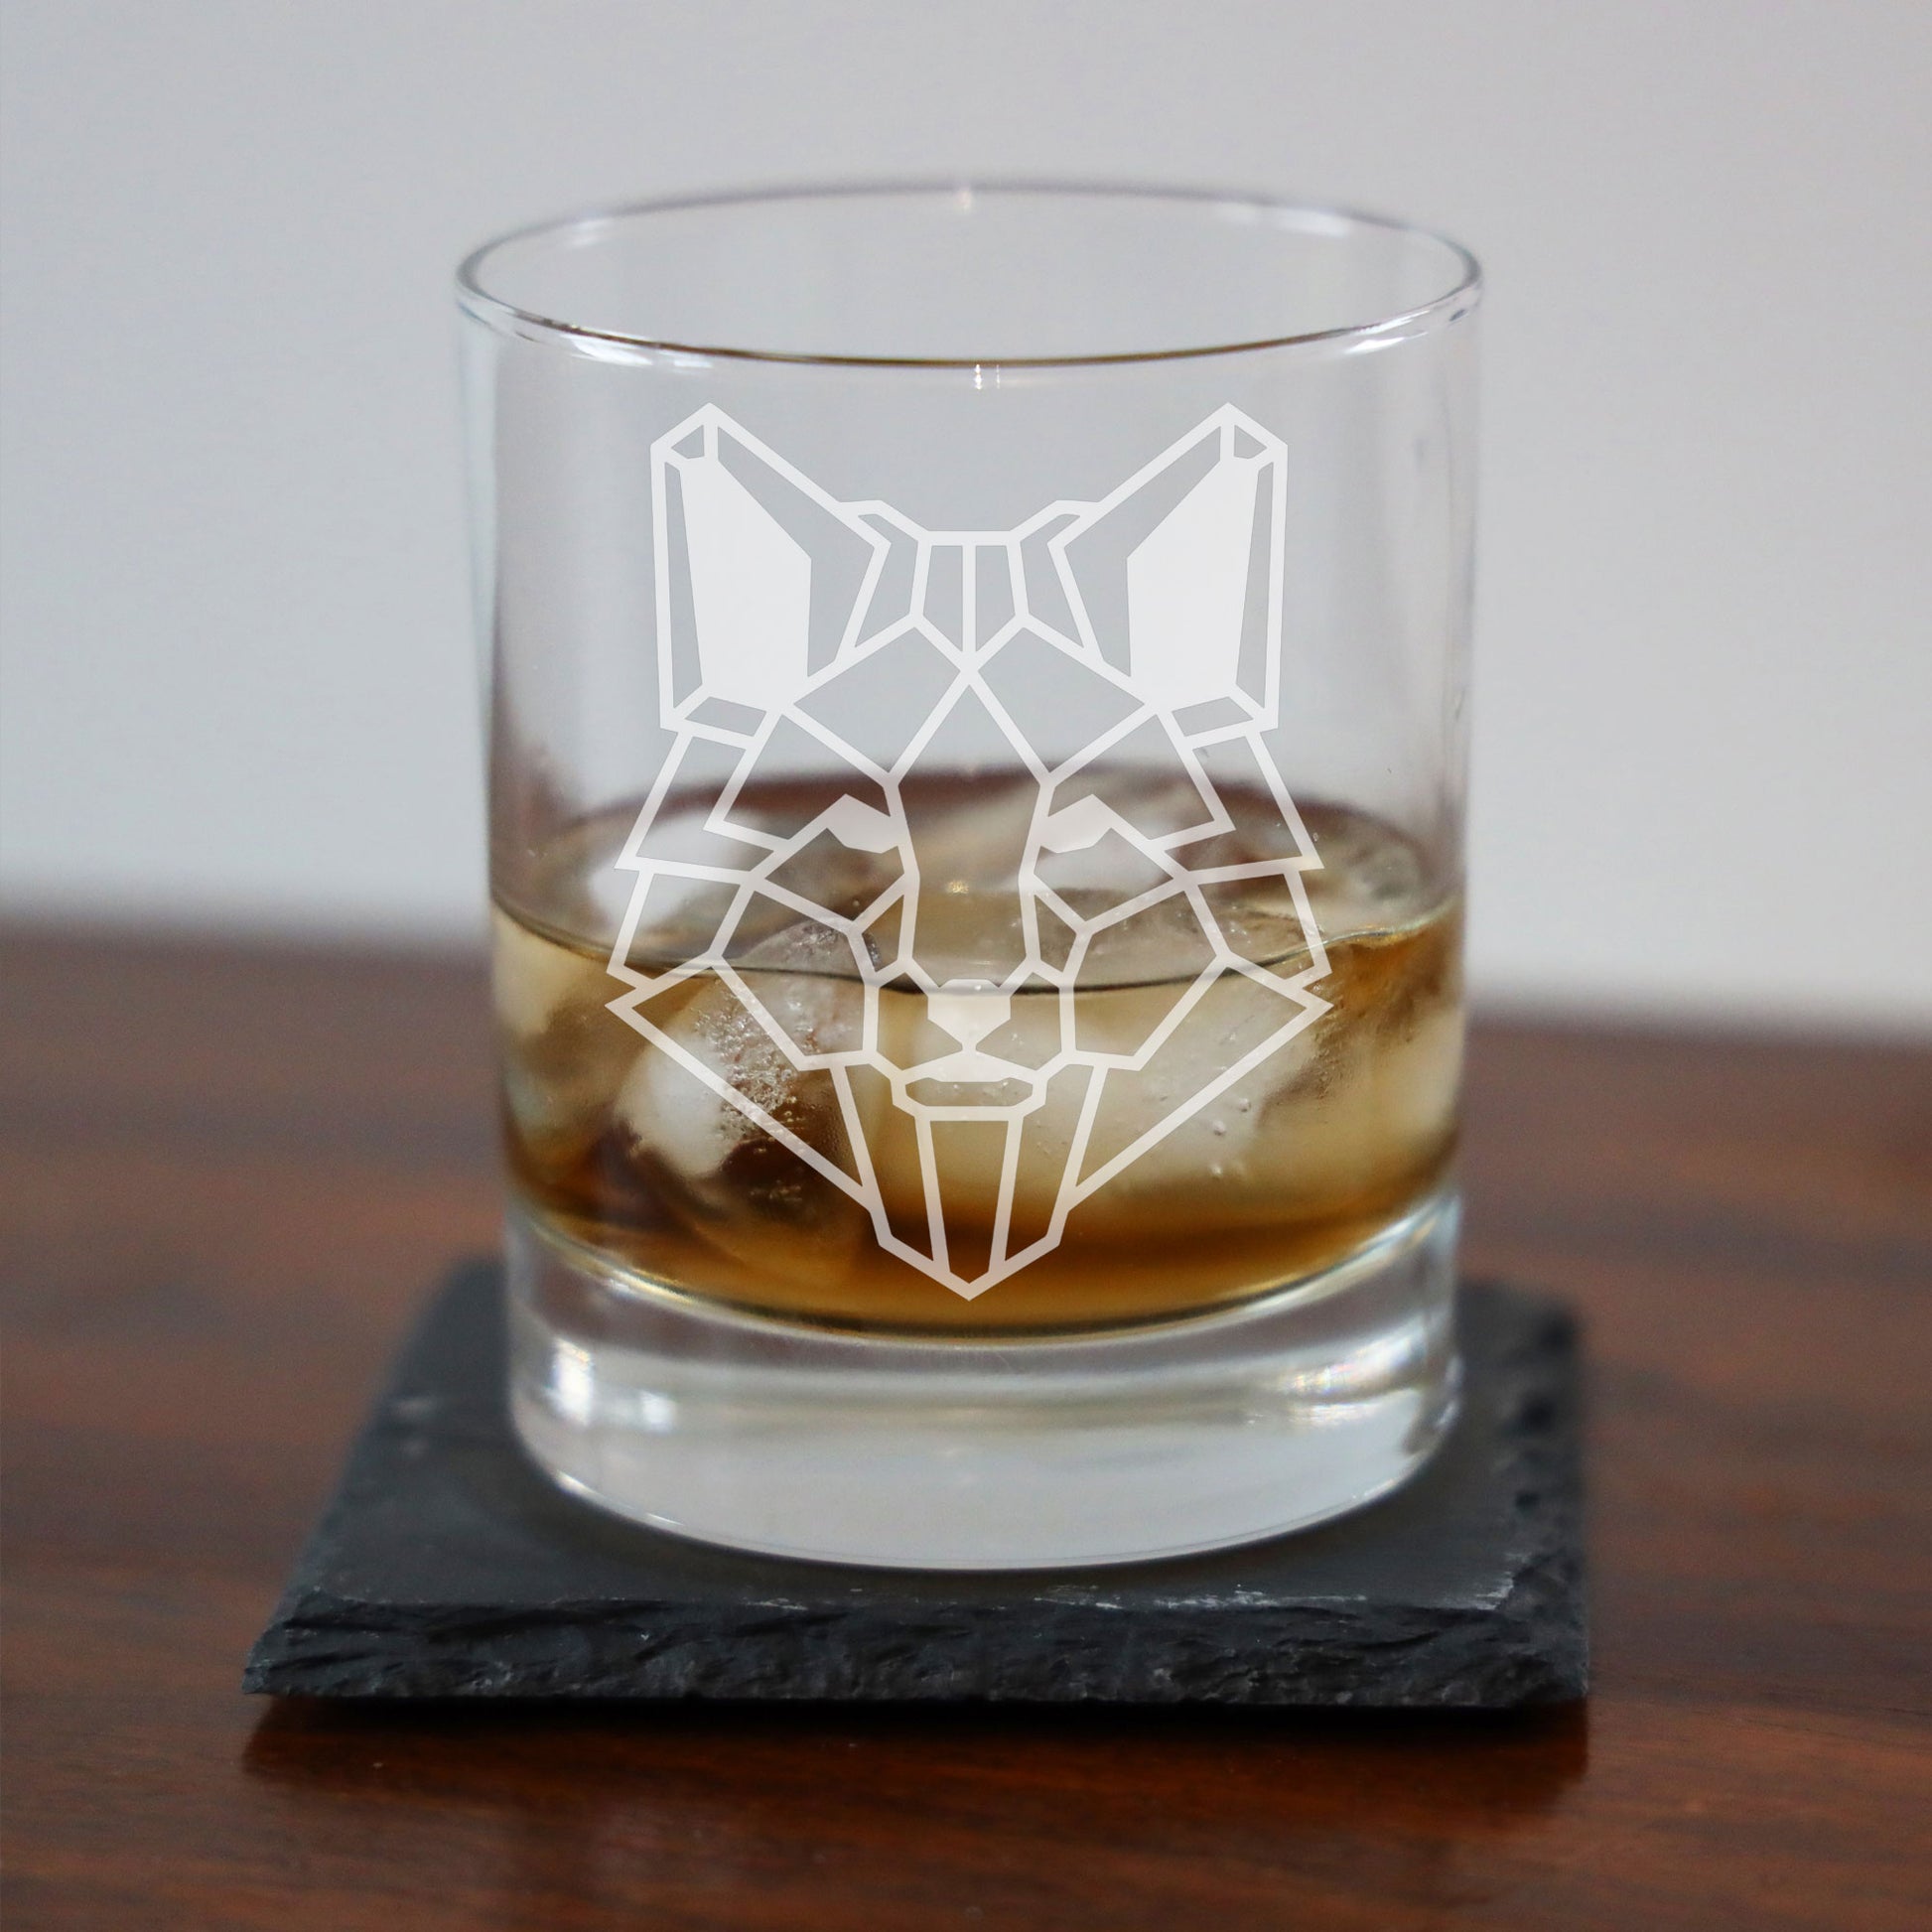 Fox Engraved Whisky Glass  - Always Looking Good -   